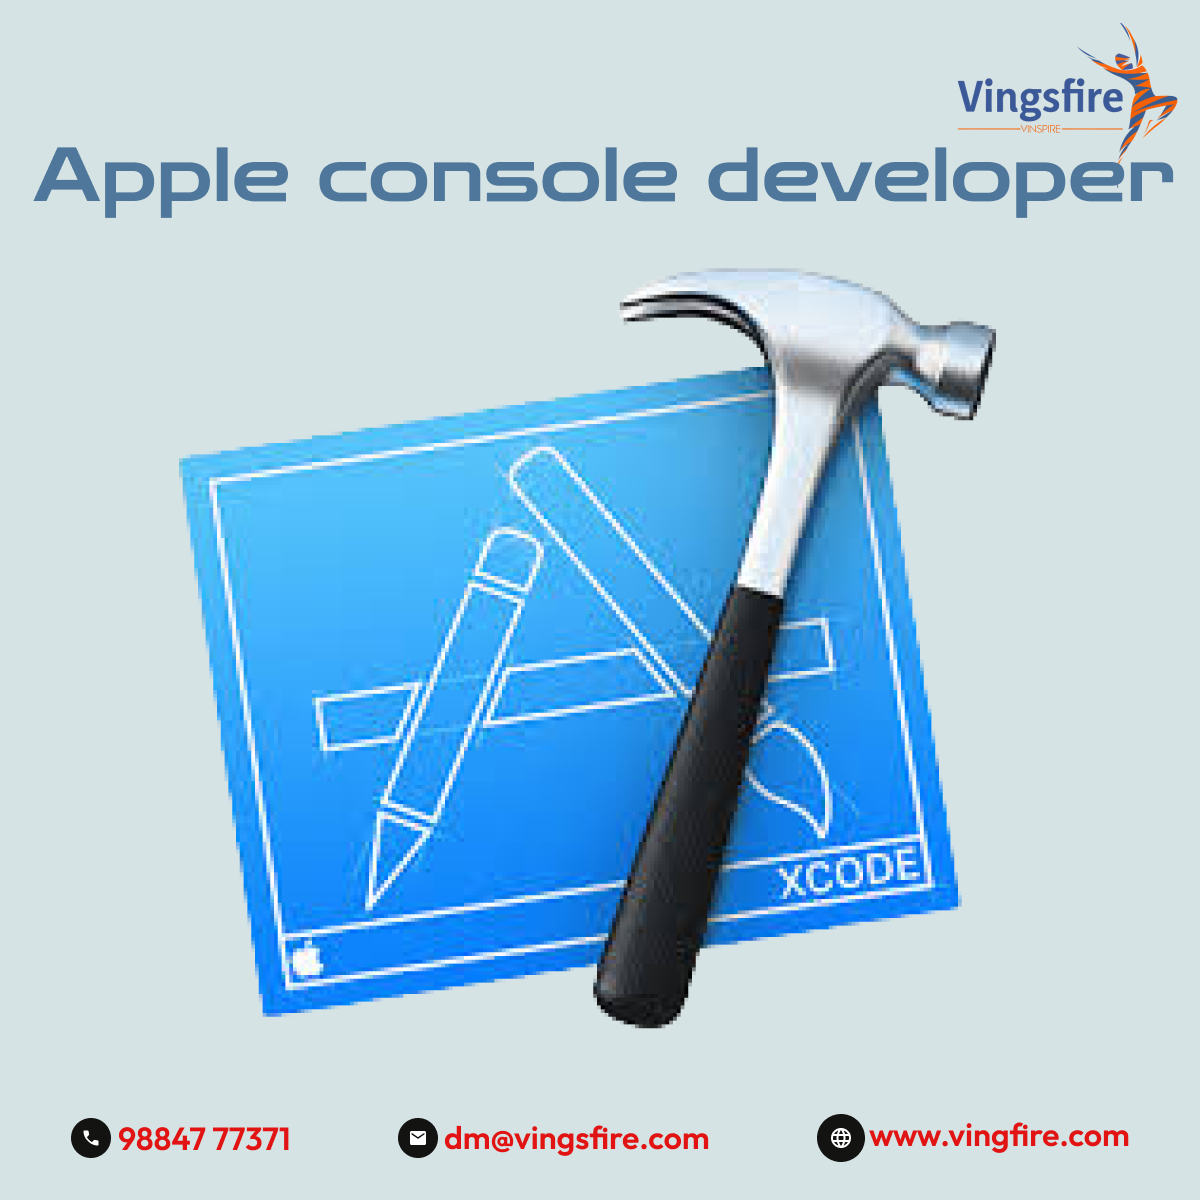 Apple console developers